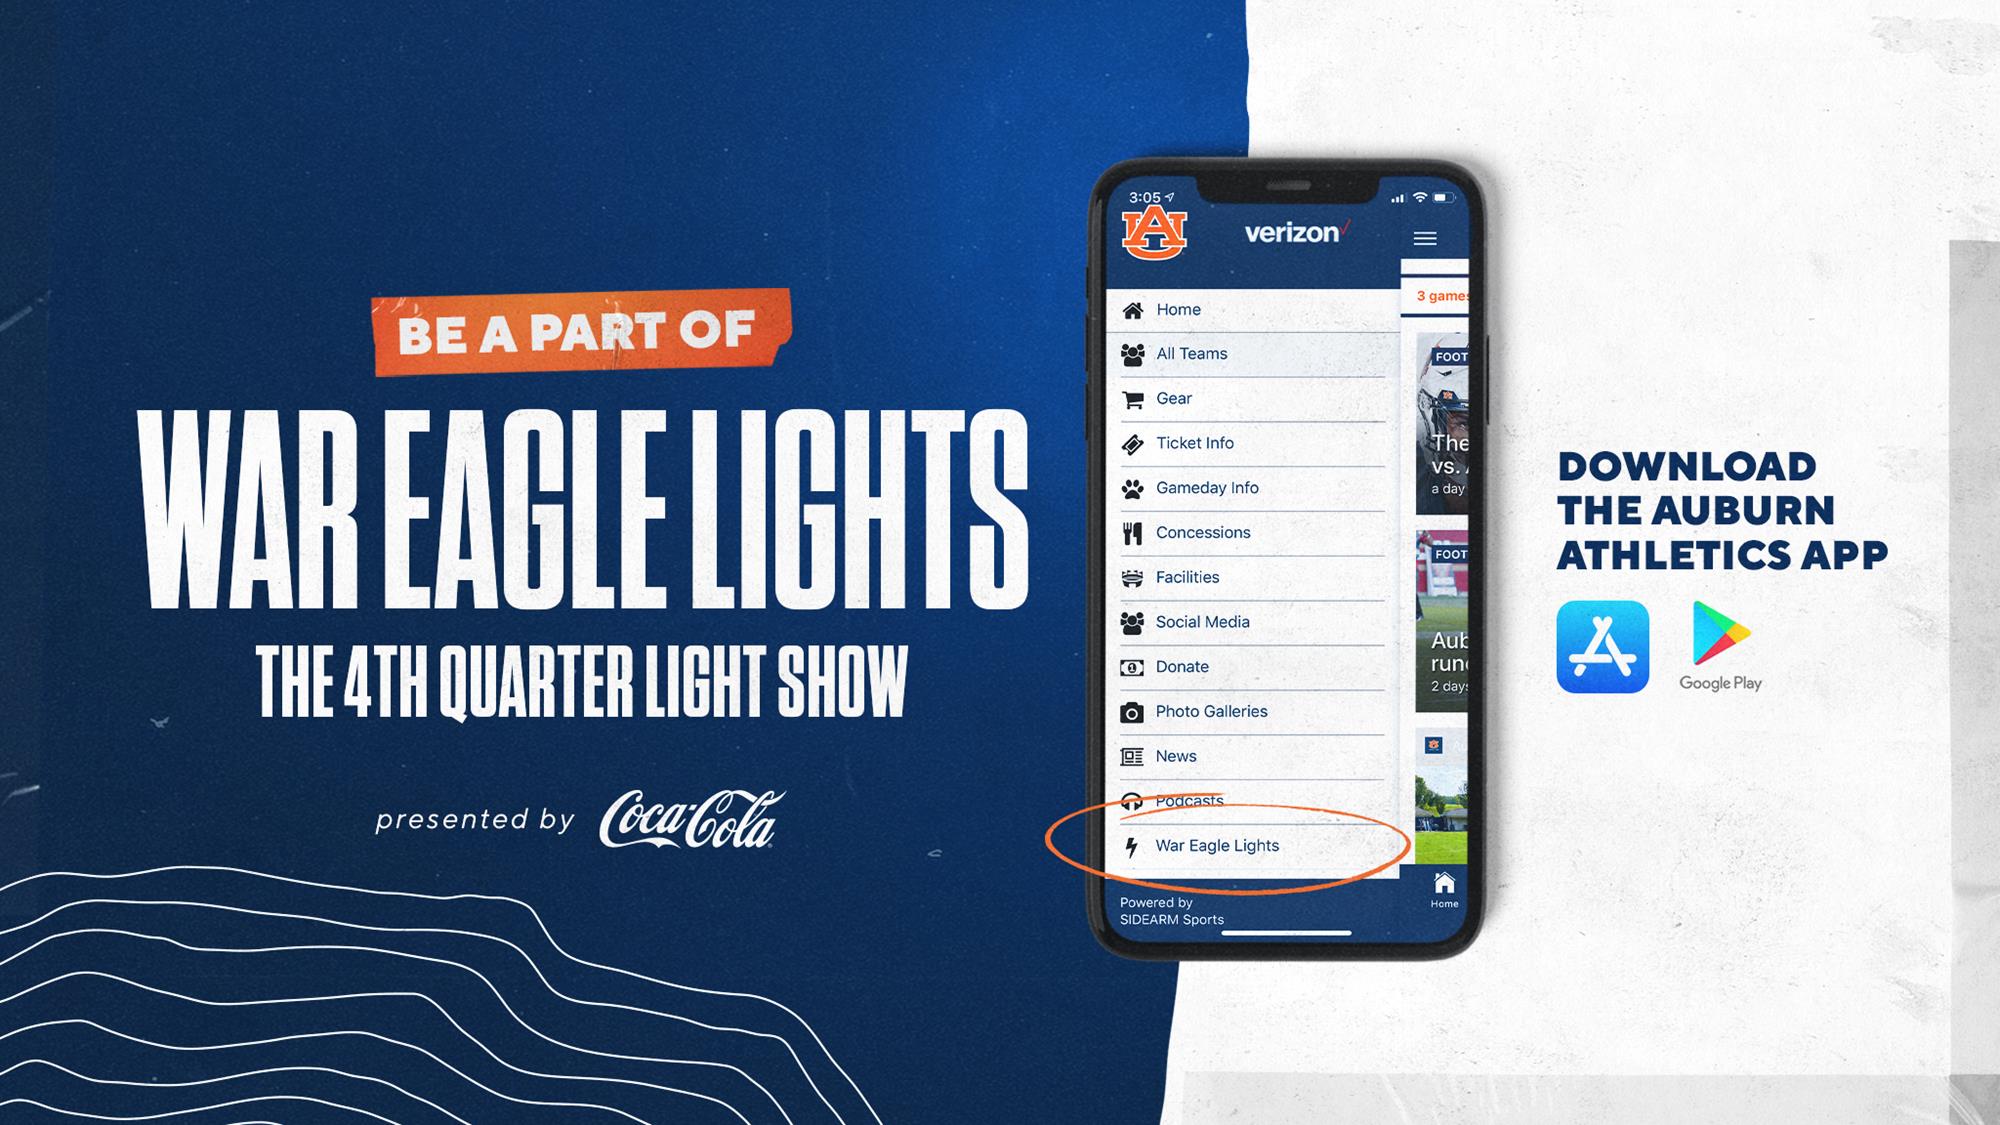 Be a part of War Eagle Lights – The 4th Quarter Light Show presented by Coca Cola. Download the Auburn Athletics app.